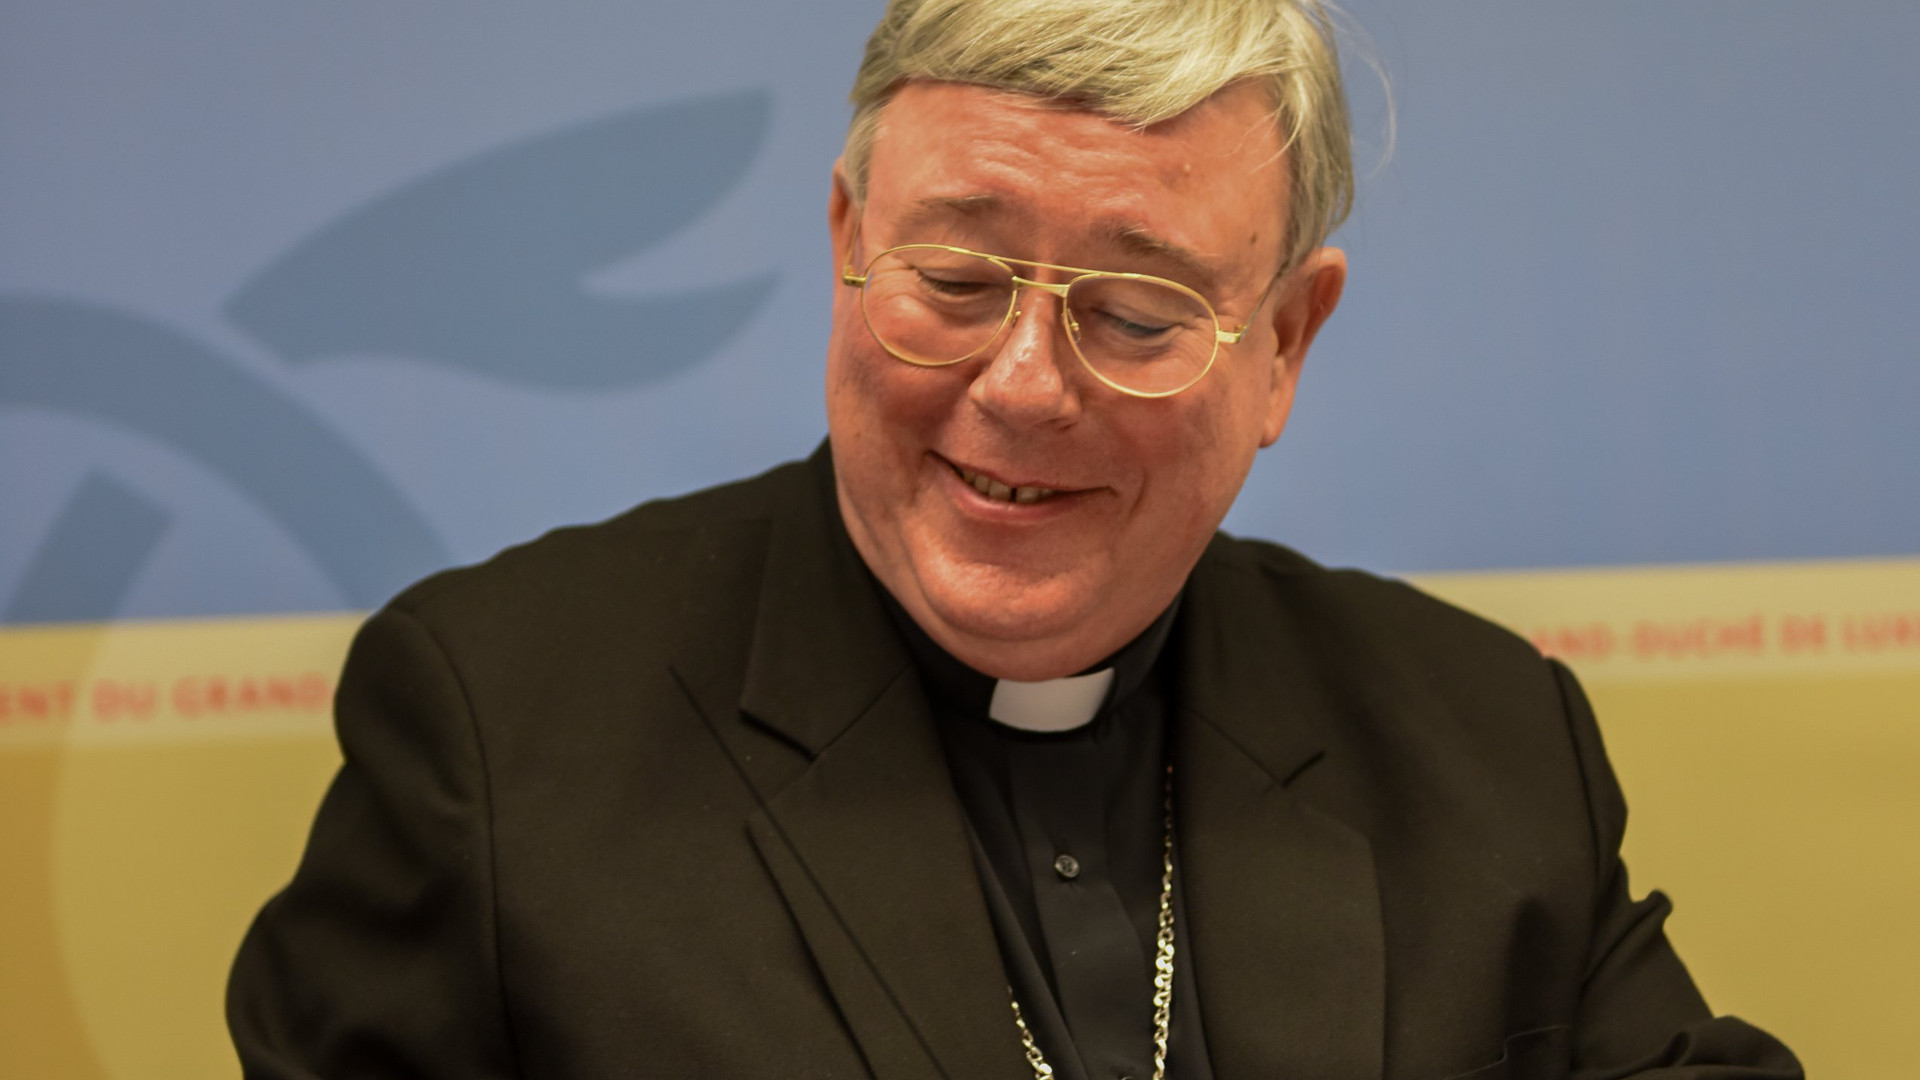 Cardinal Jean-Claude Hollerich, Archbishop of Luxembourg